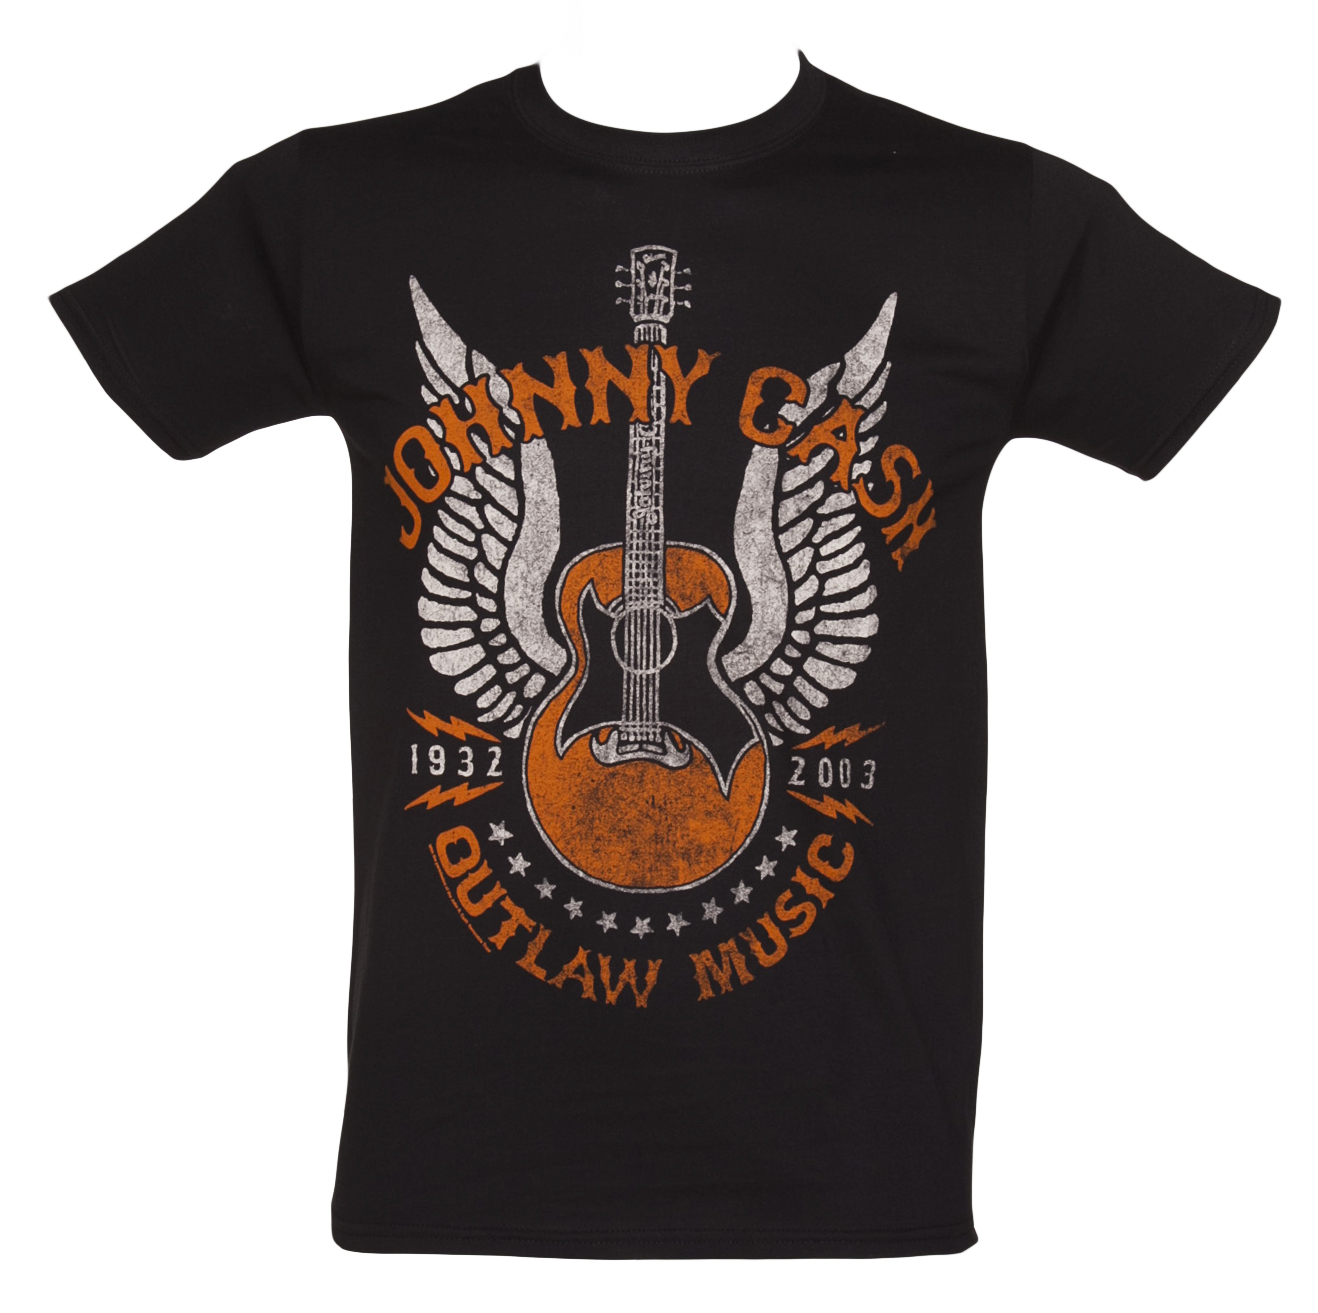 Johnny Cash Outlaw T-Shirt